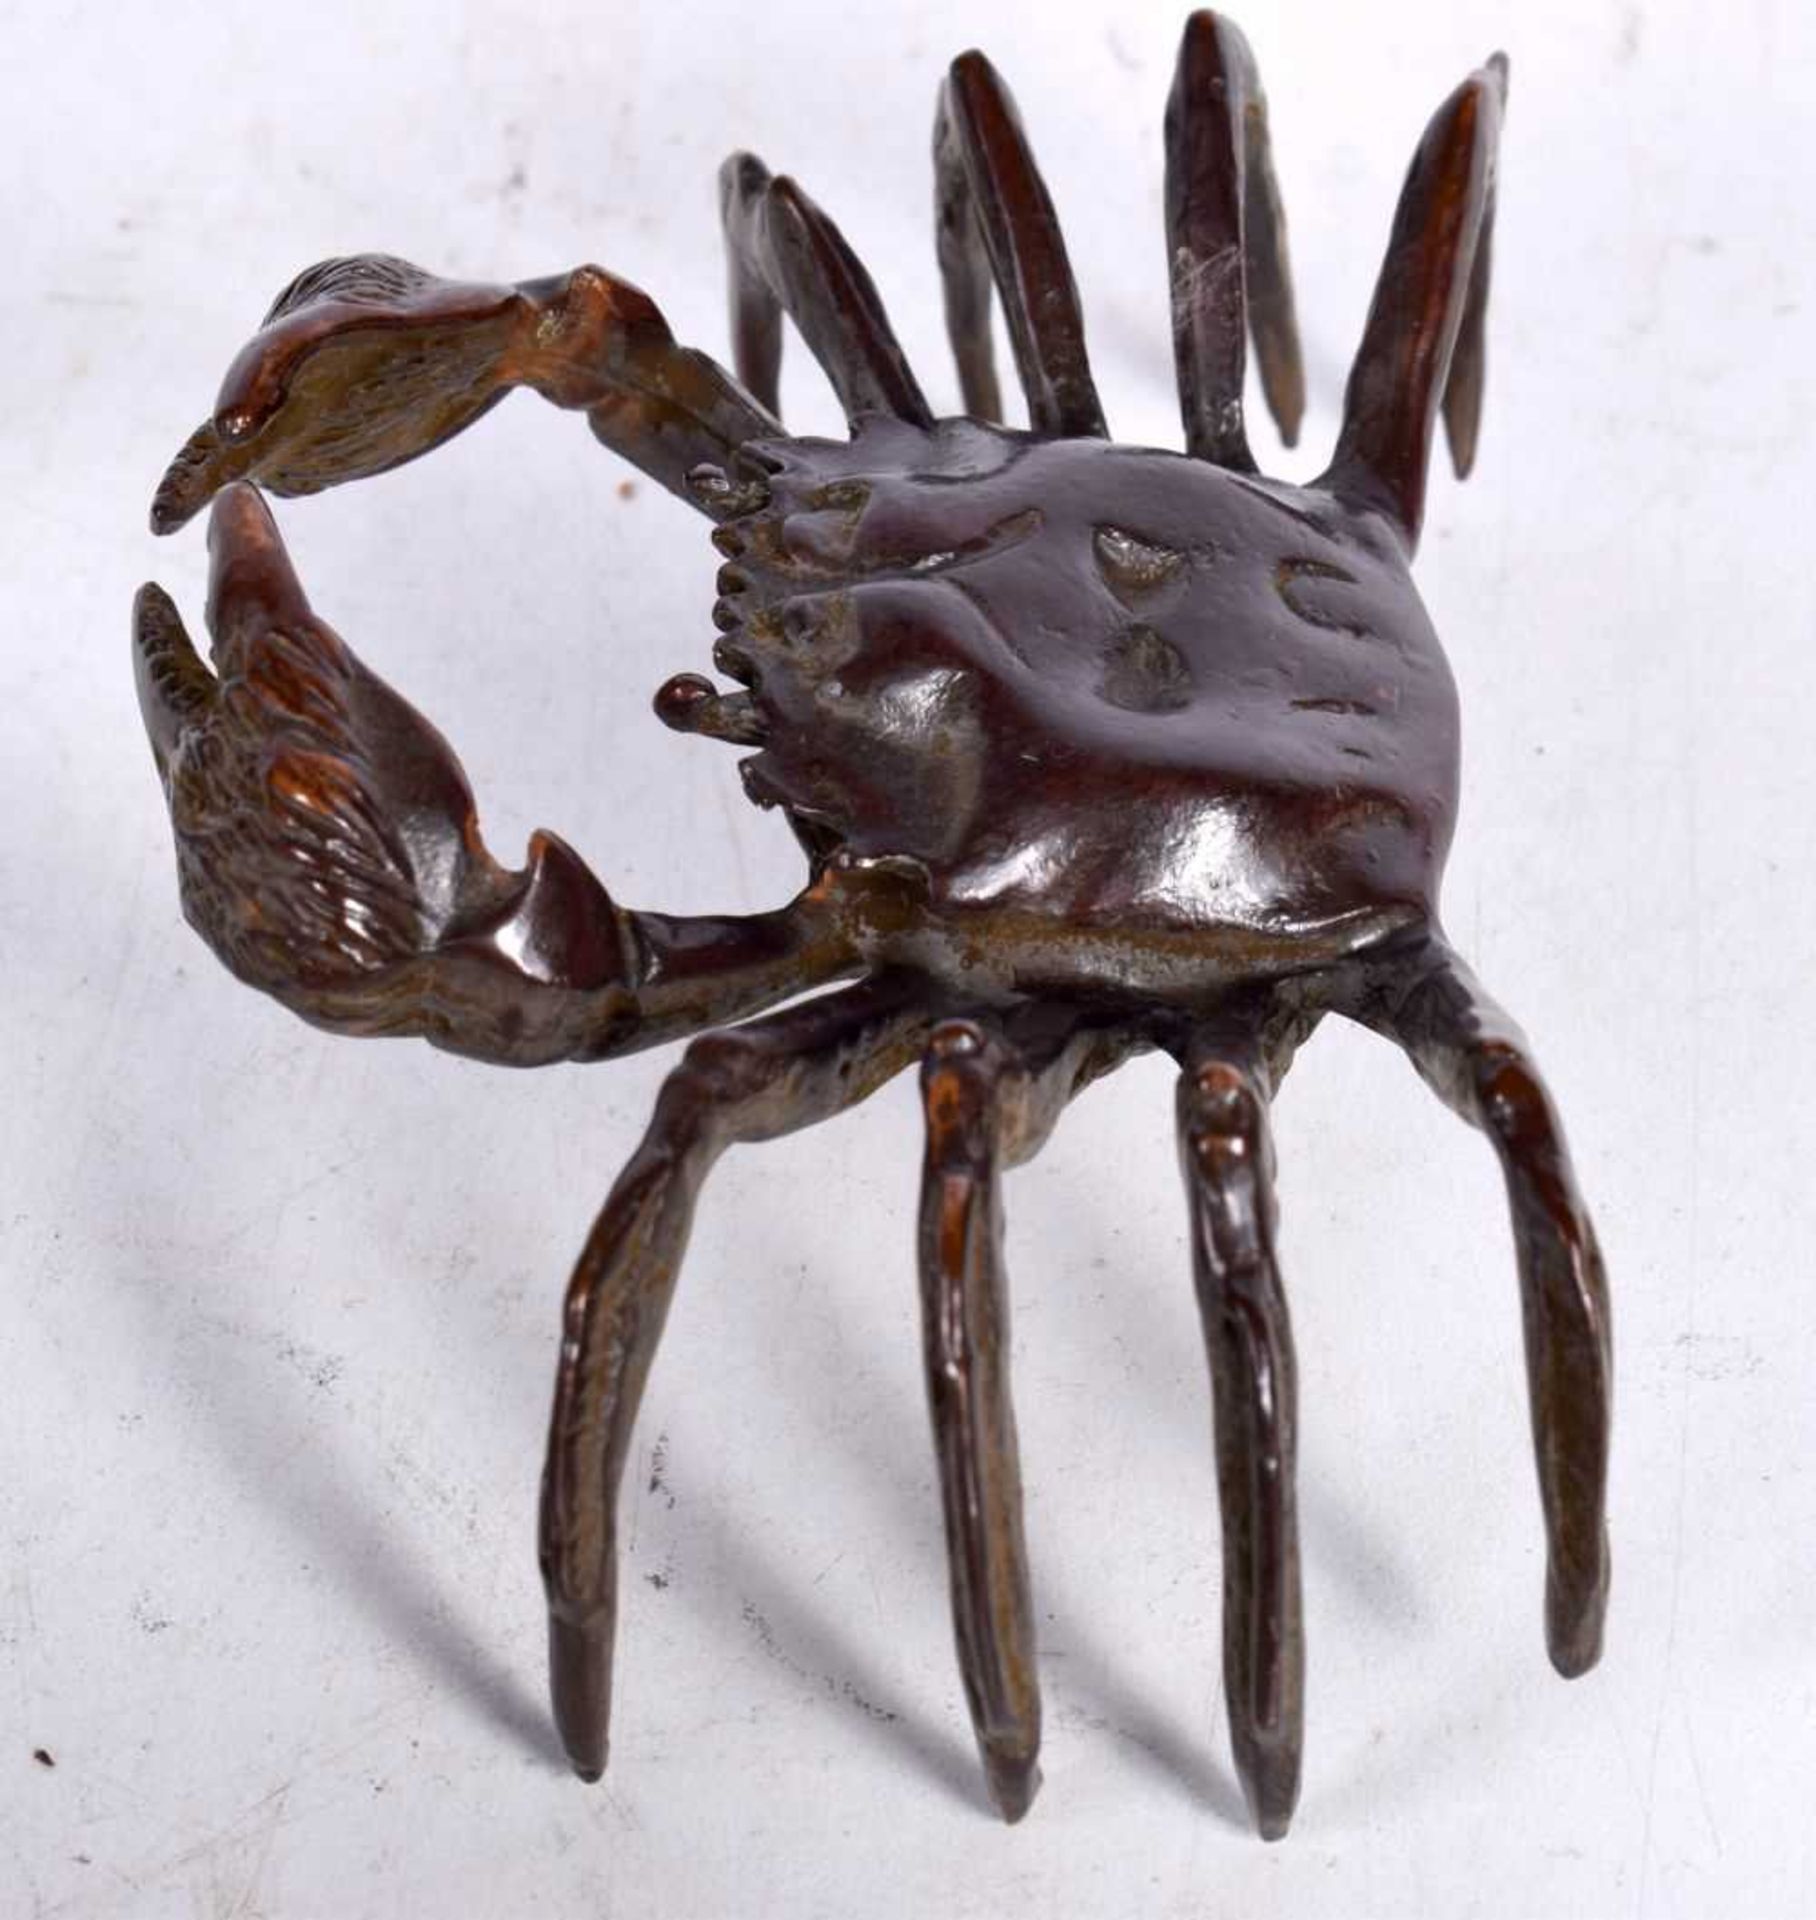 A Large Japanese Bronze Model of a Crab. 11.6cm x 7.1cm x 4.8cm, weight 242g - Image 2 of 3